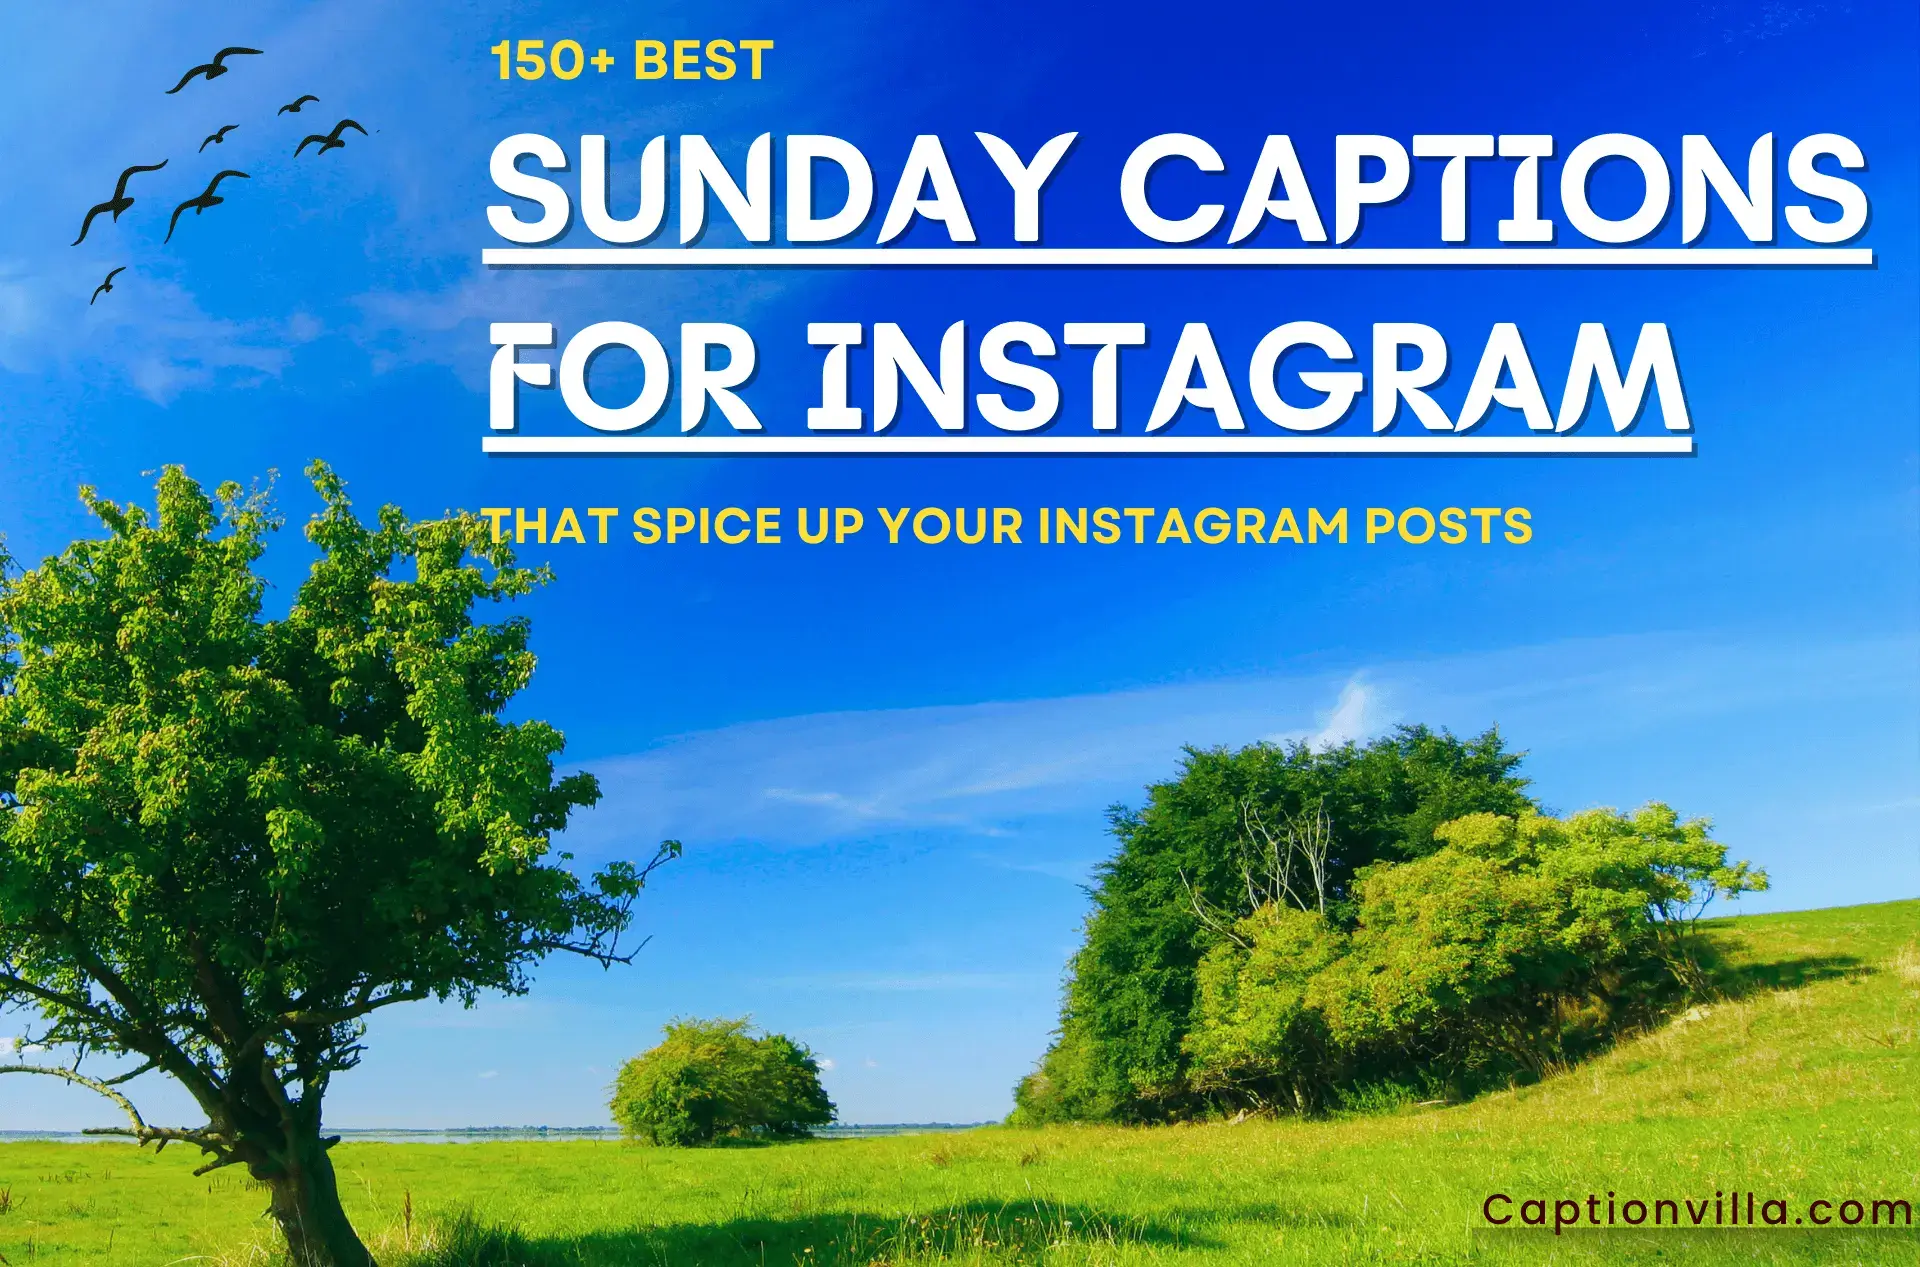 A thumbnail having beautiful garden and includes Sunday Captions For Instagram.